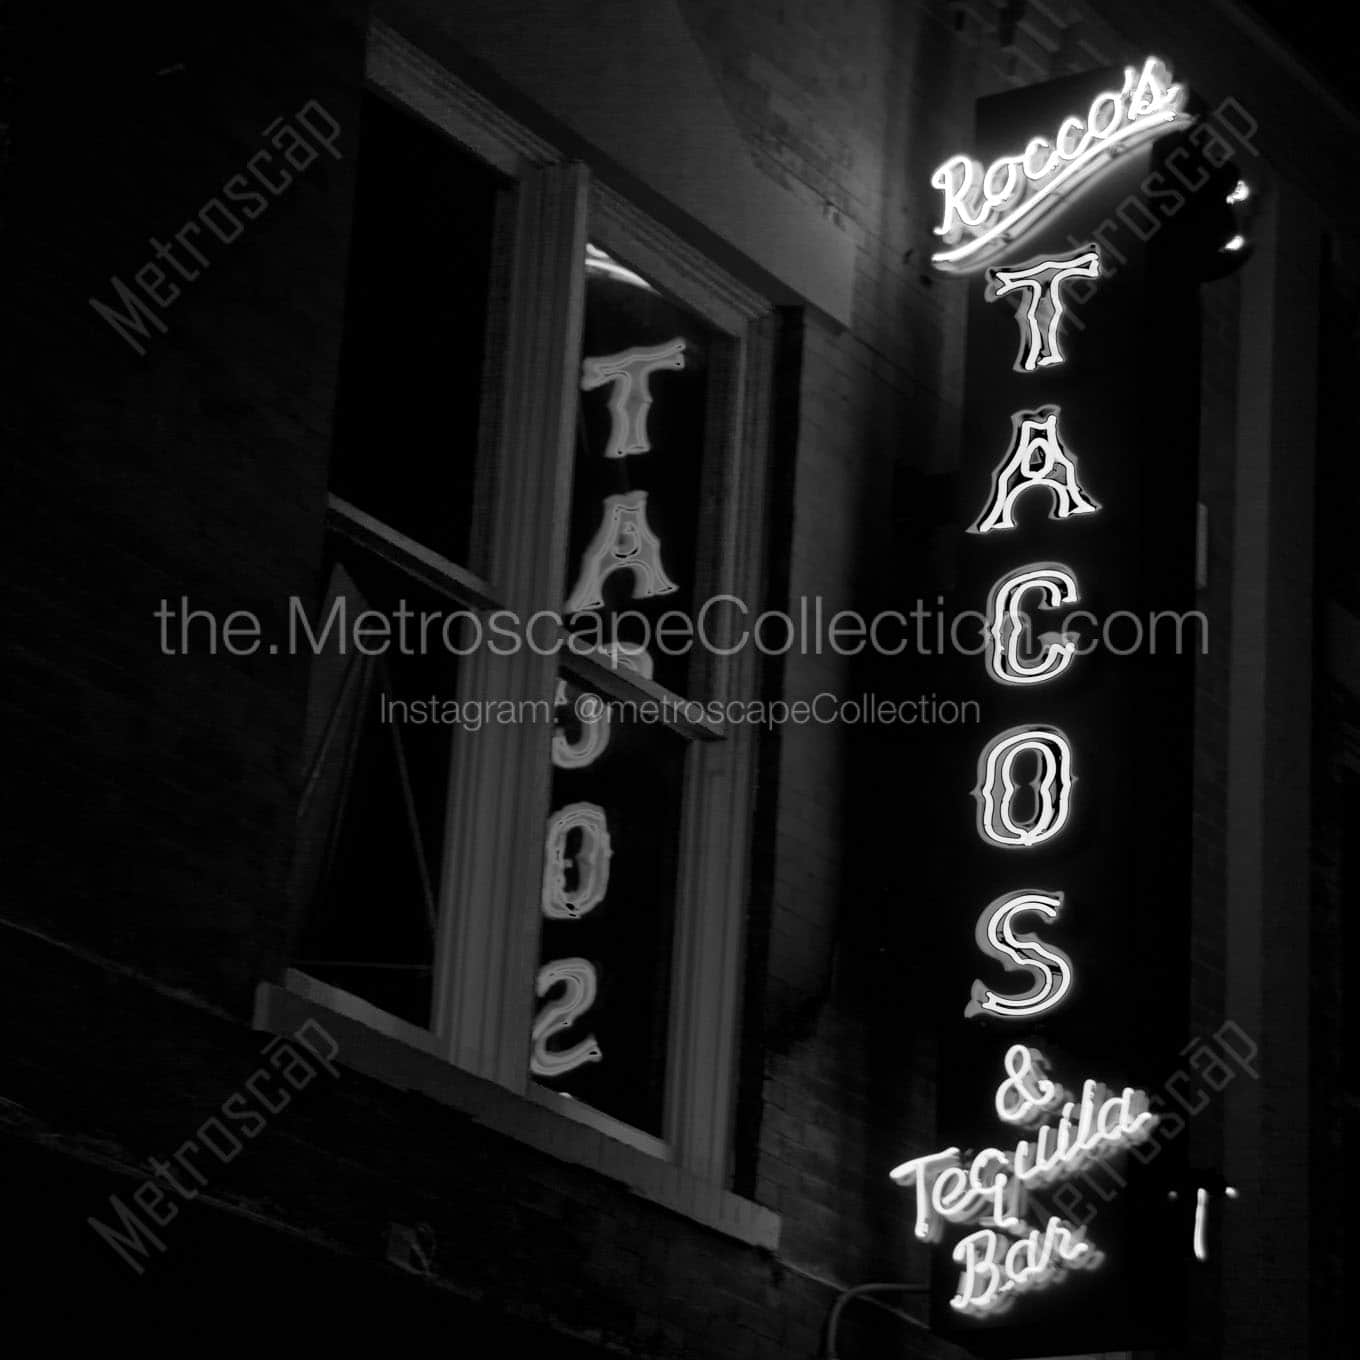 roccos tacos and tequila bar Black & White Office Art